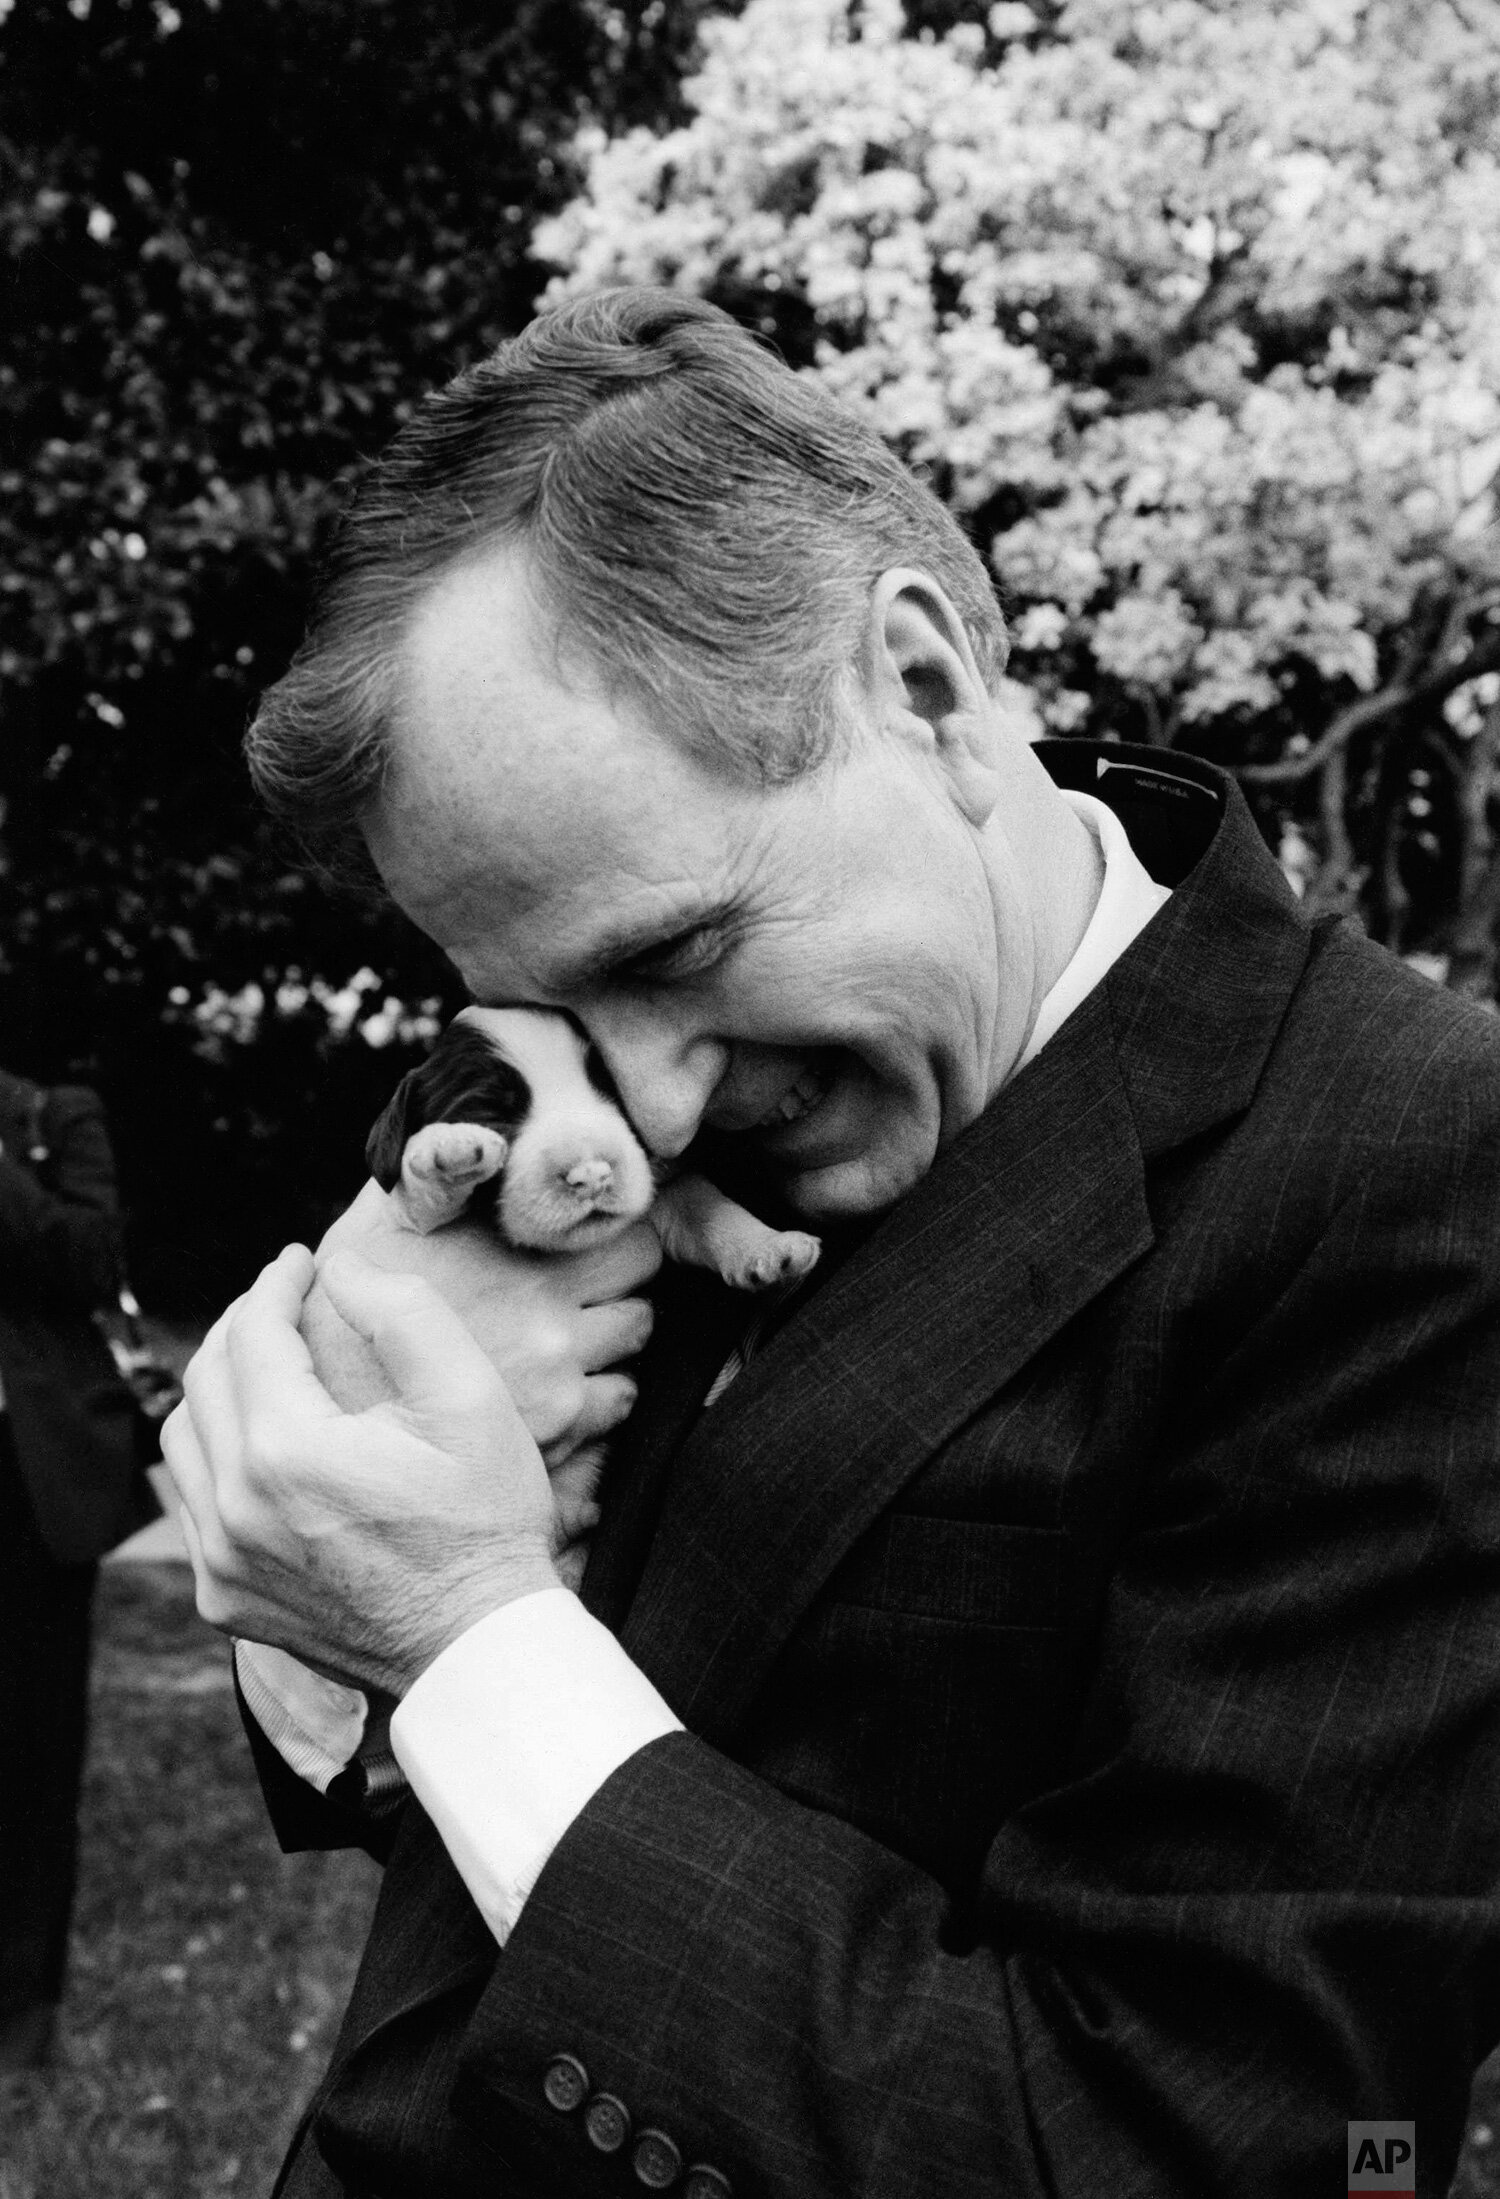  President George H.W. Bush holds one of first dog Millie's six puppies at the White House in Washington, March 29, 1989.  Mother dog Millie gave birth March 27, with First Lady Barbara Bush serving as midwife according to spokeswomen. (AP Photo/Ron 